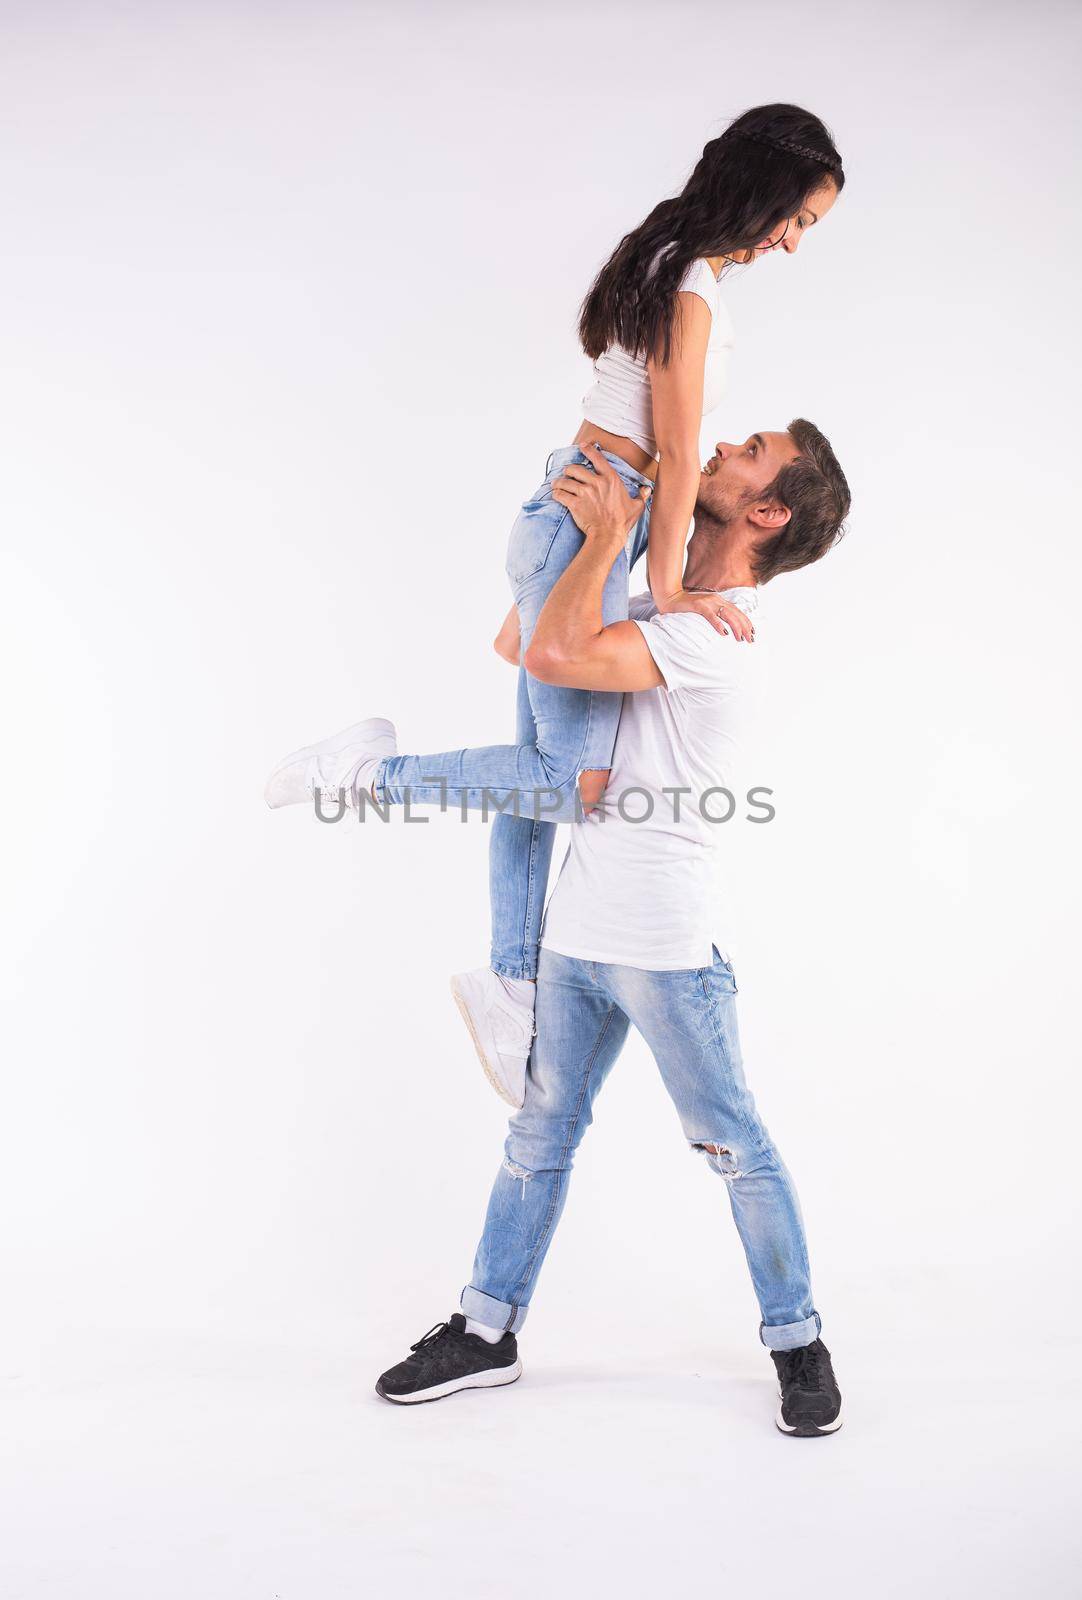 Salsa, kizomba and bachata dancers on white background. Social dance concept by Satura86